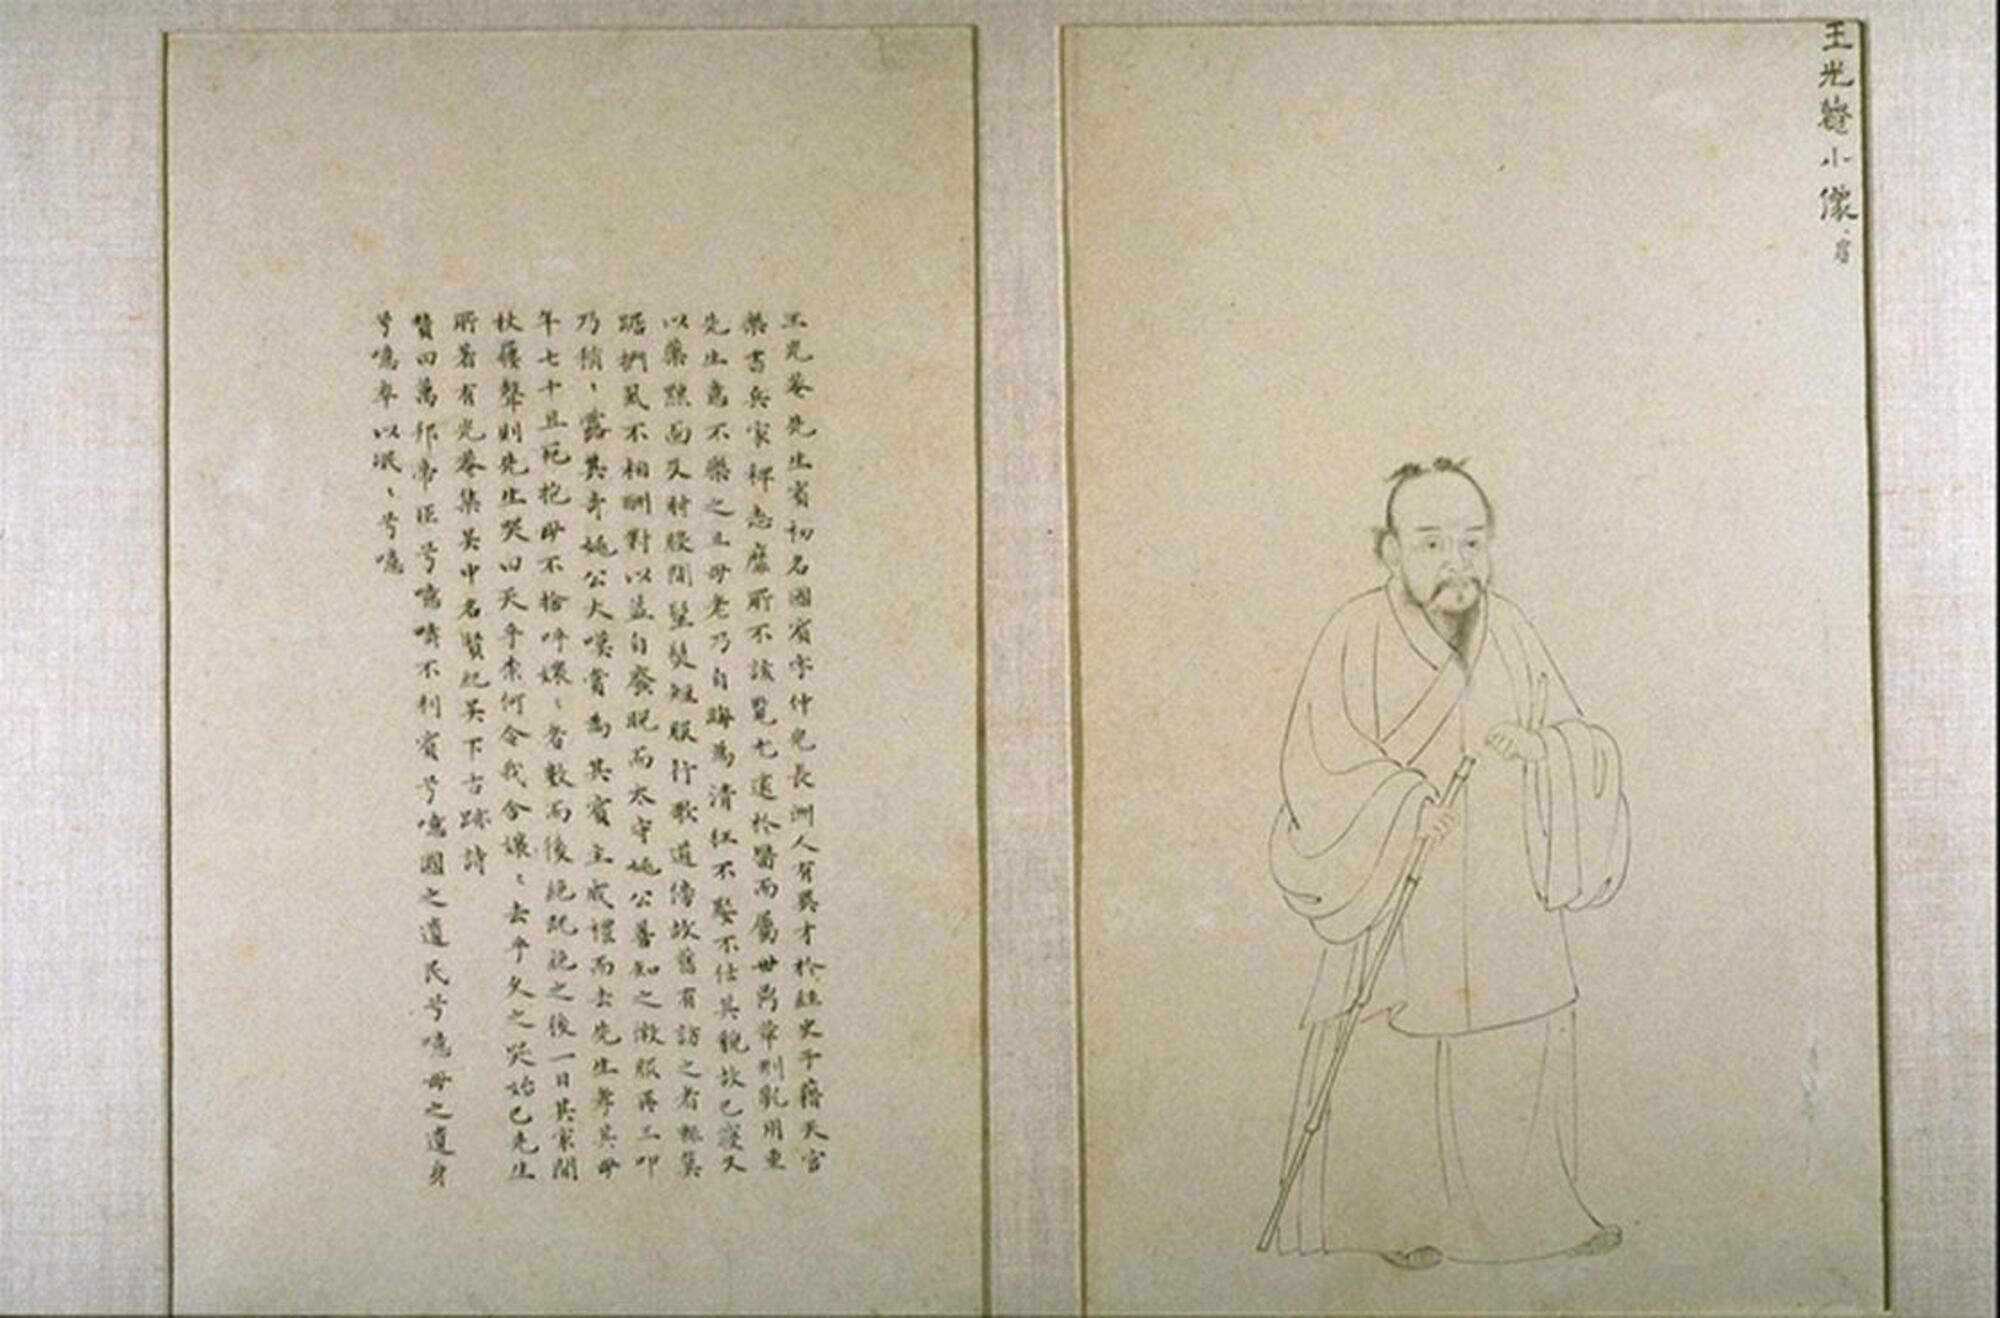 Album leaf in black ink. Left page contains text and the right page depicts a man with a beard and mustache, dressed in robes, and holding a bamboo staff.